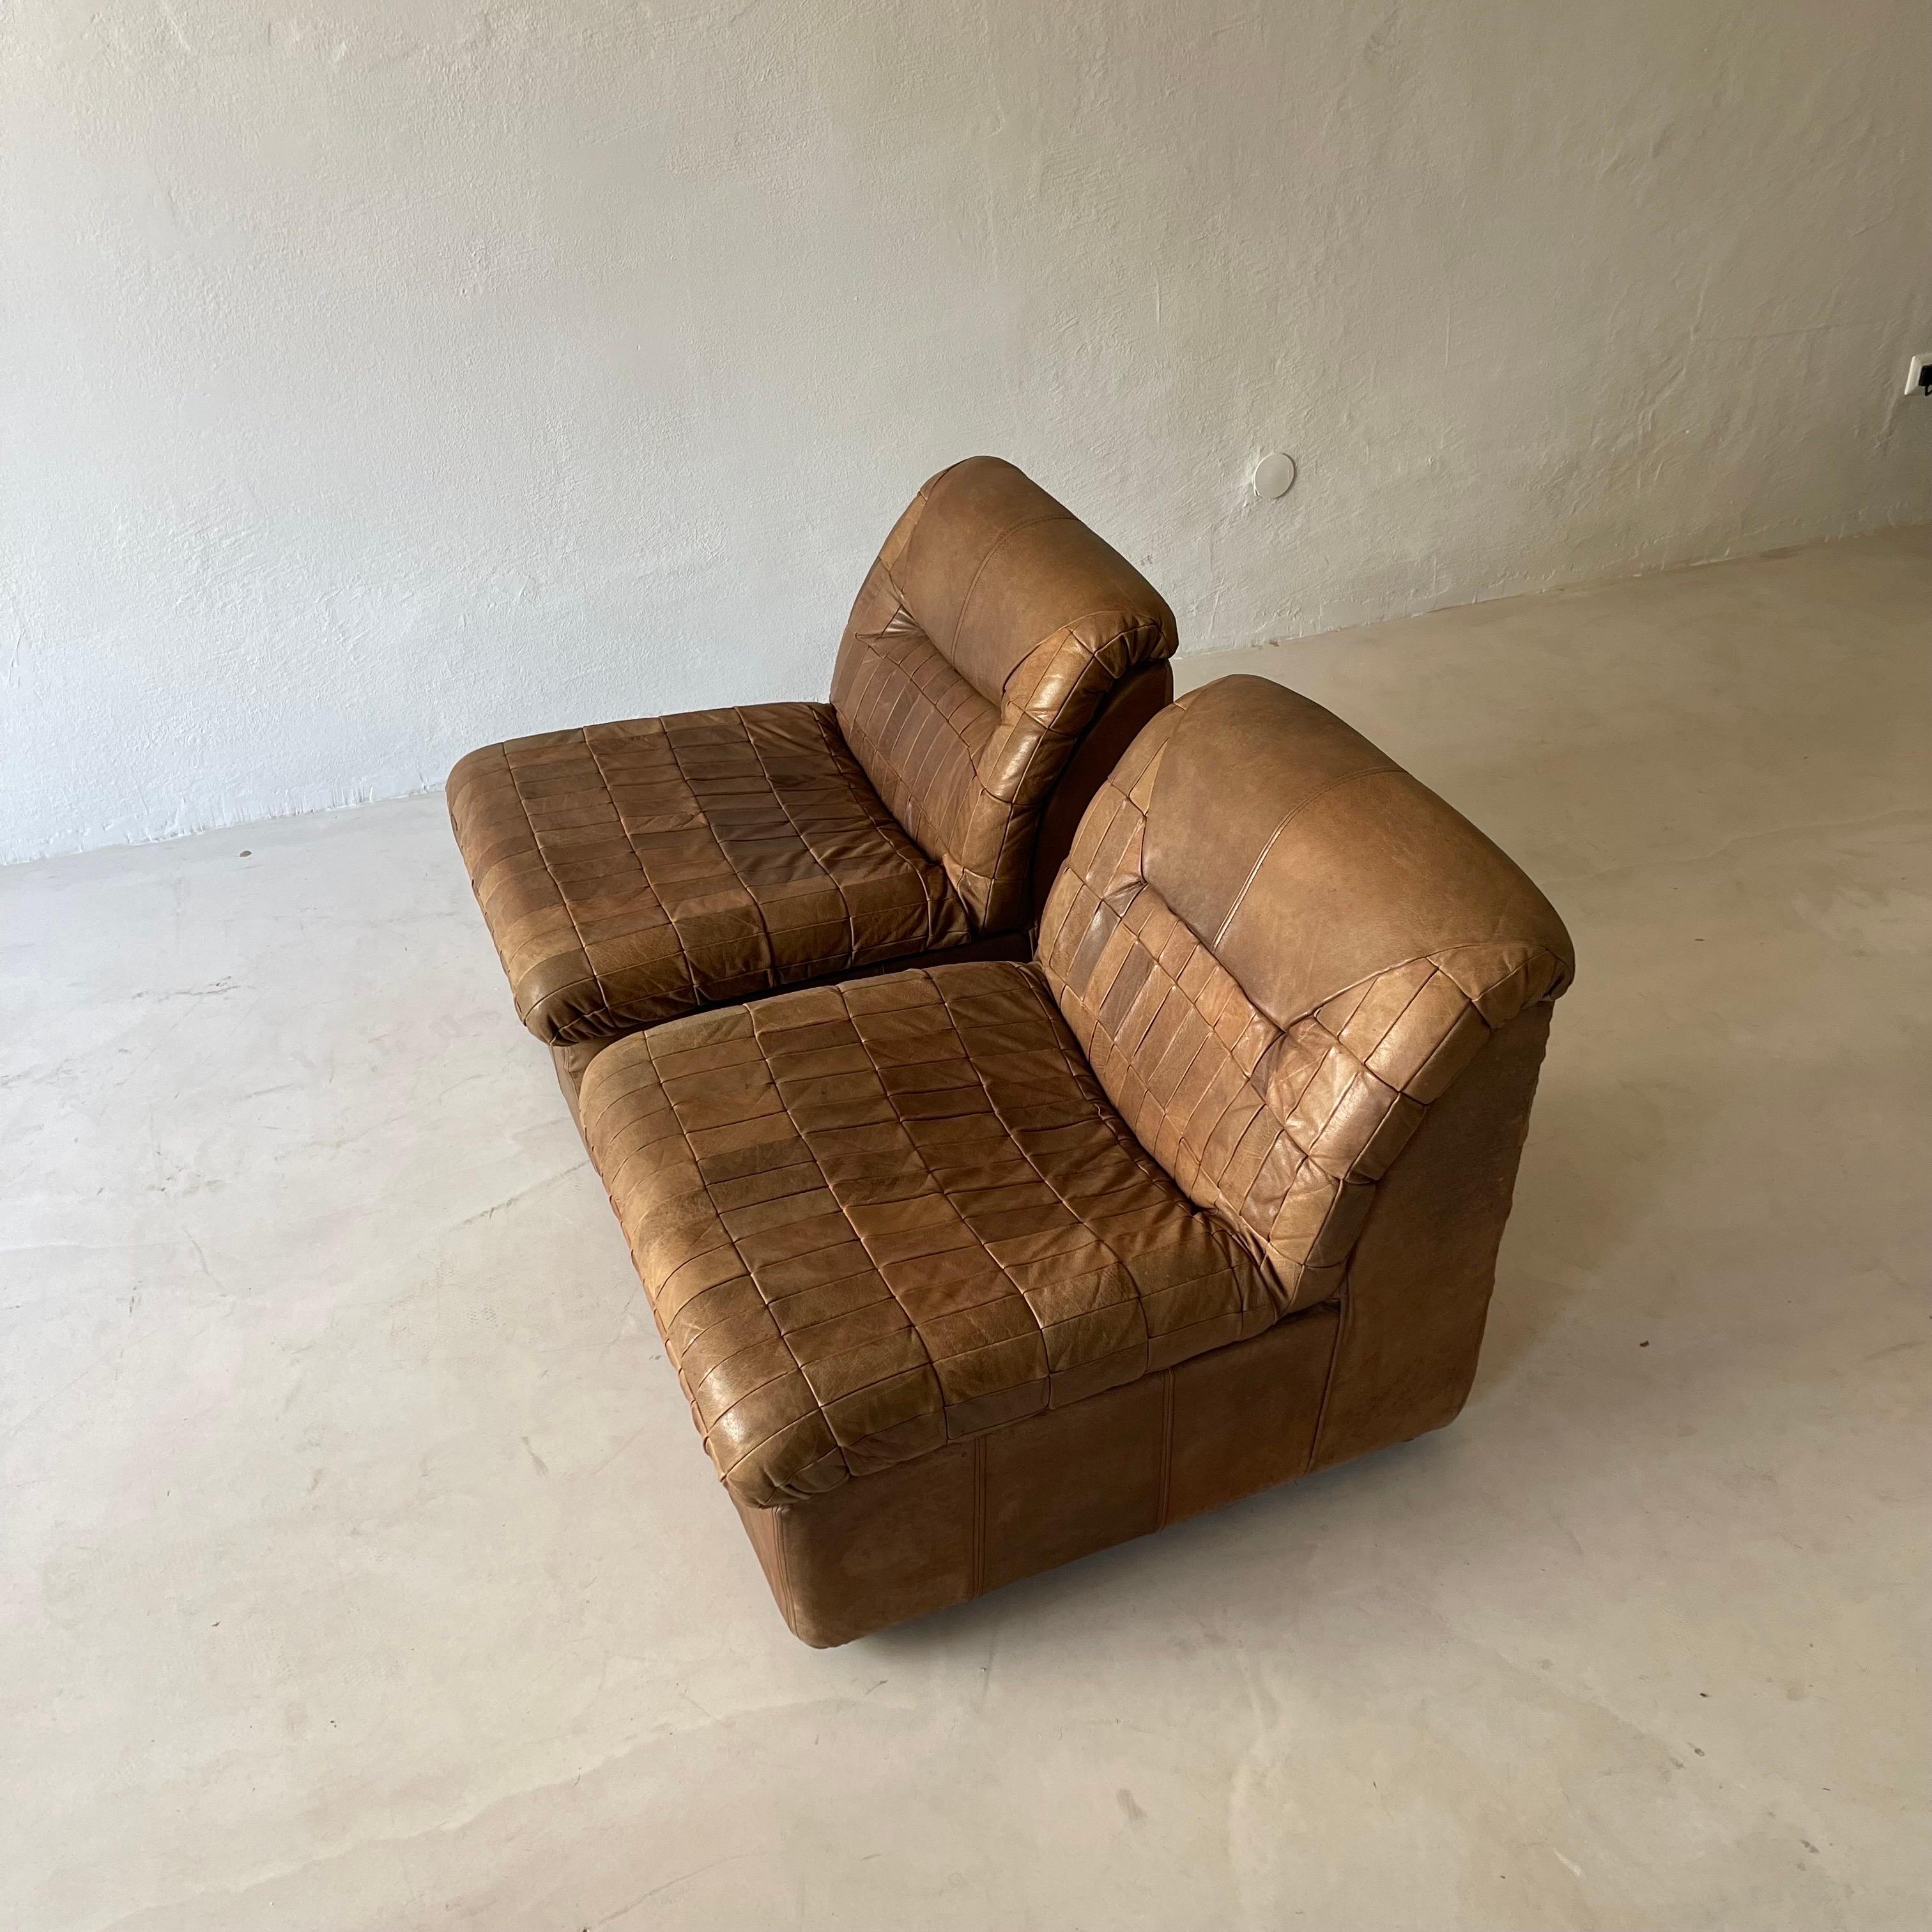 De Sede patchwork lounge chairs pair in cognac leather, 1970s.